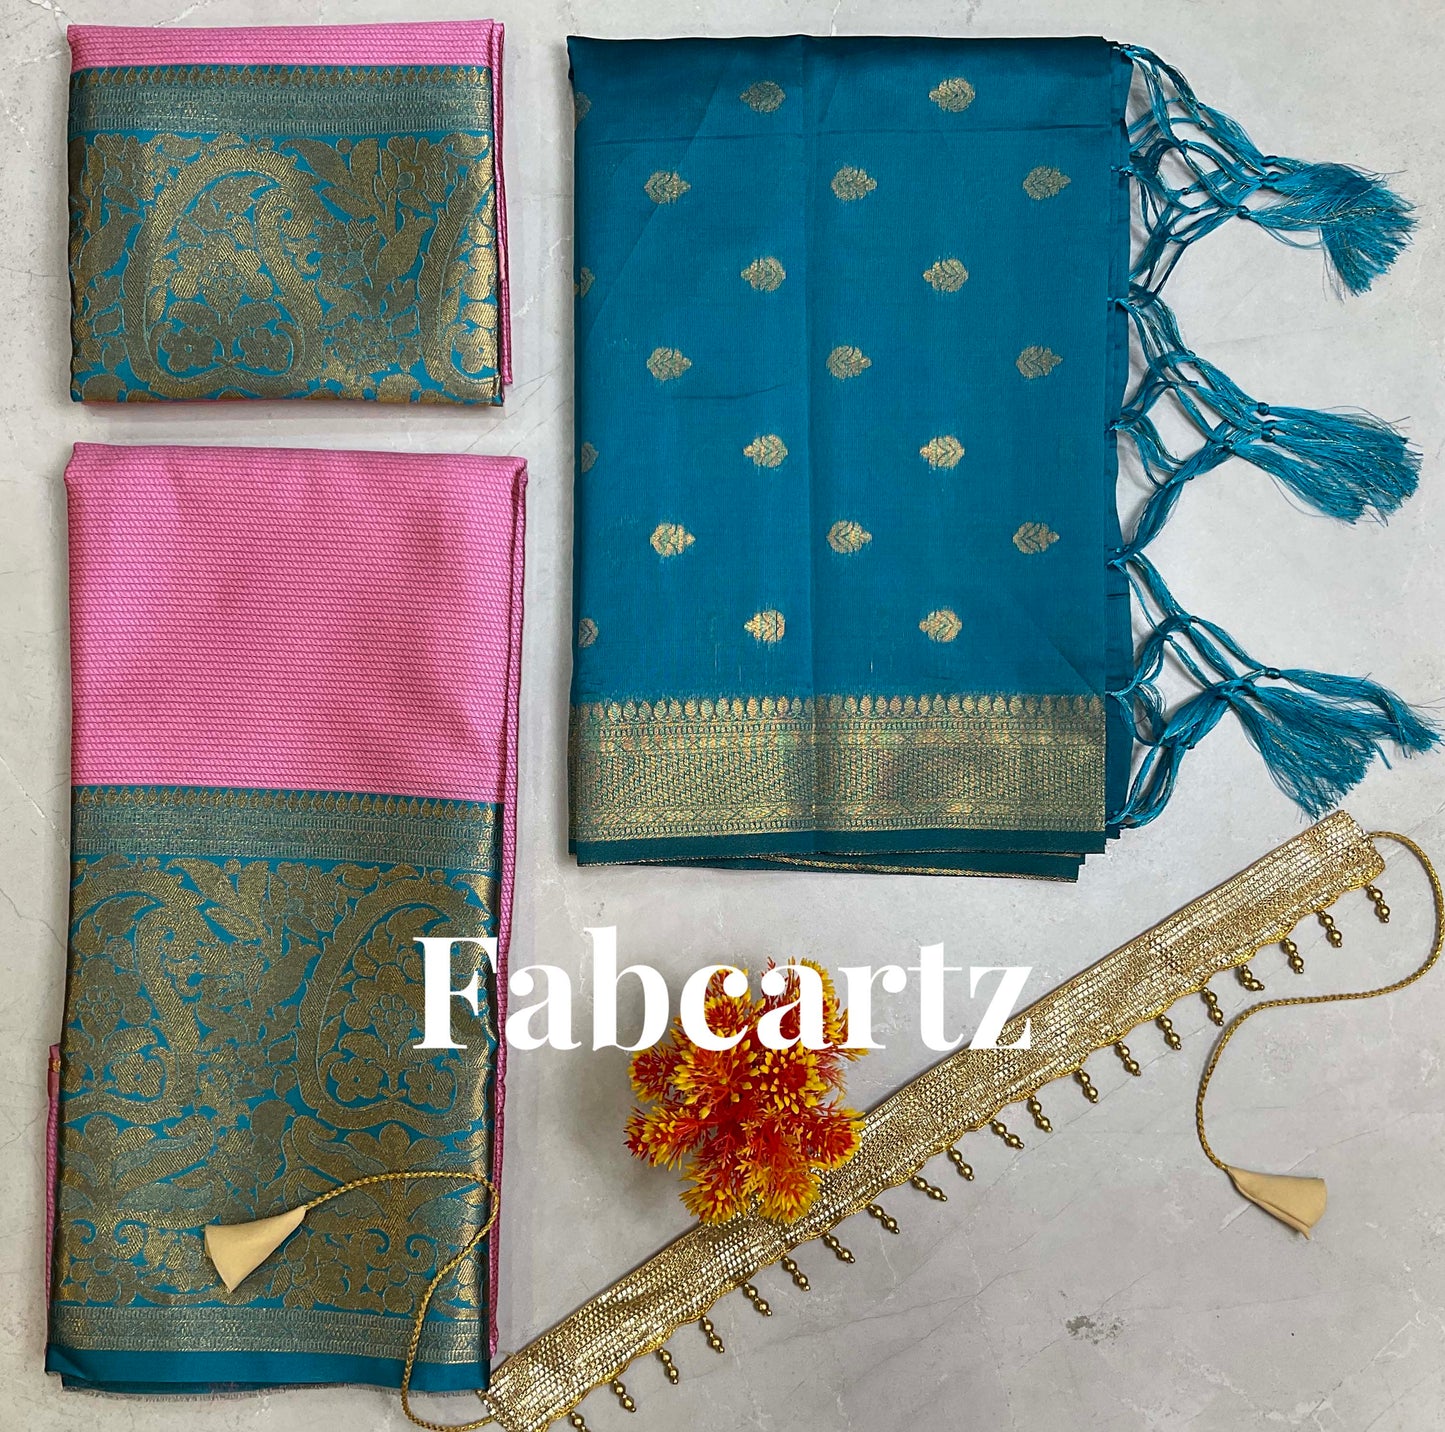 South Indian Festival Traditional Half Saree (Aarvi)